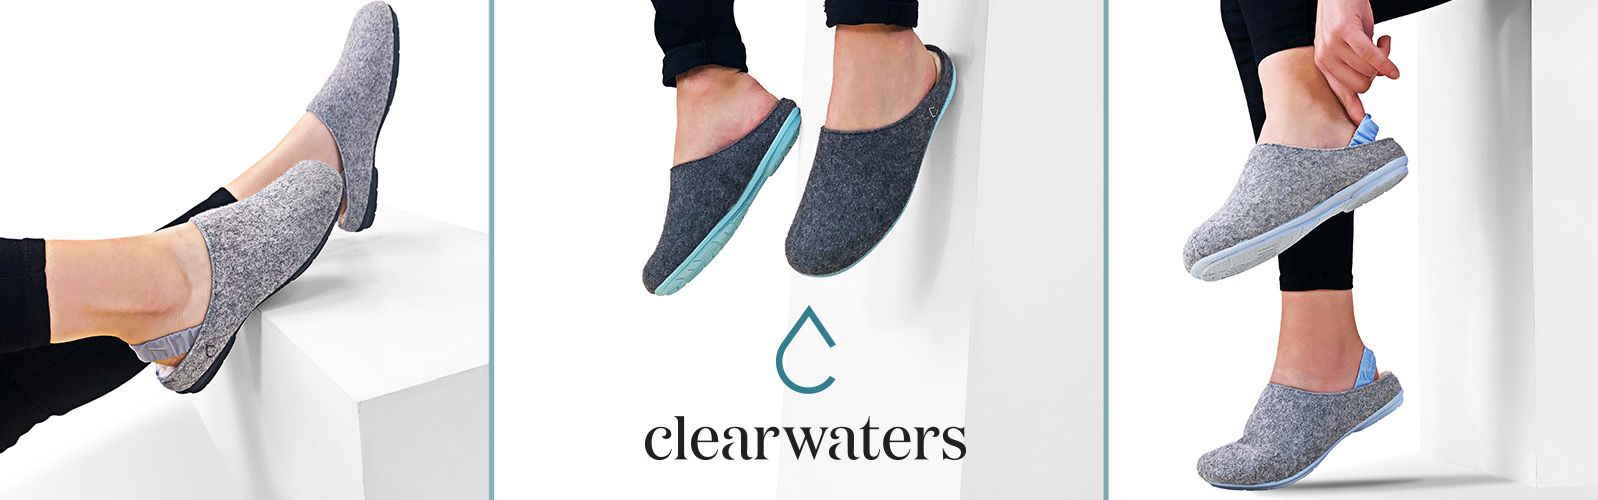 CLEARWATERS Schuhe